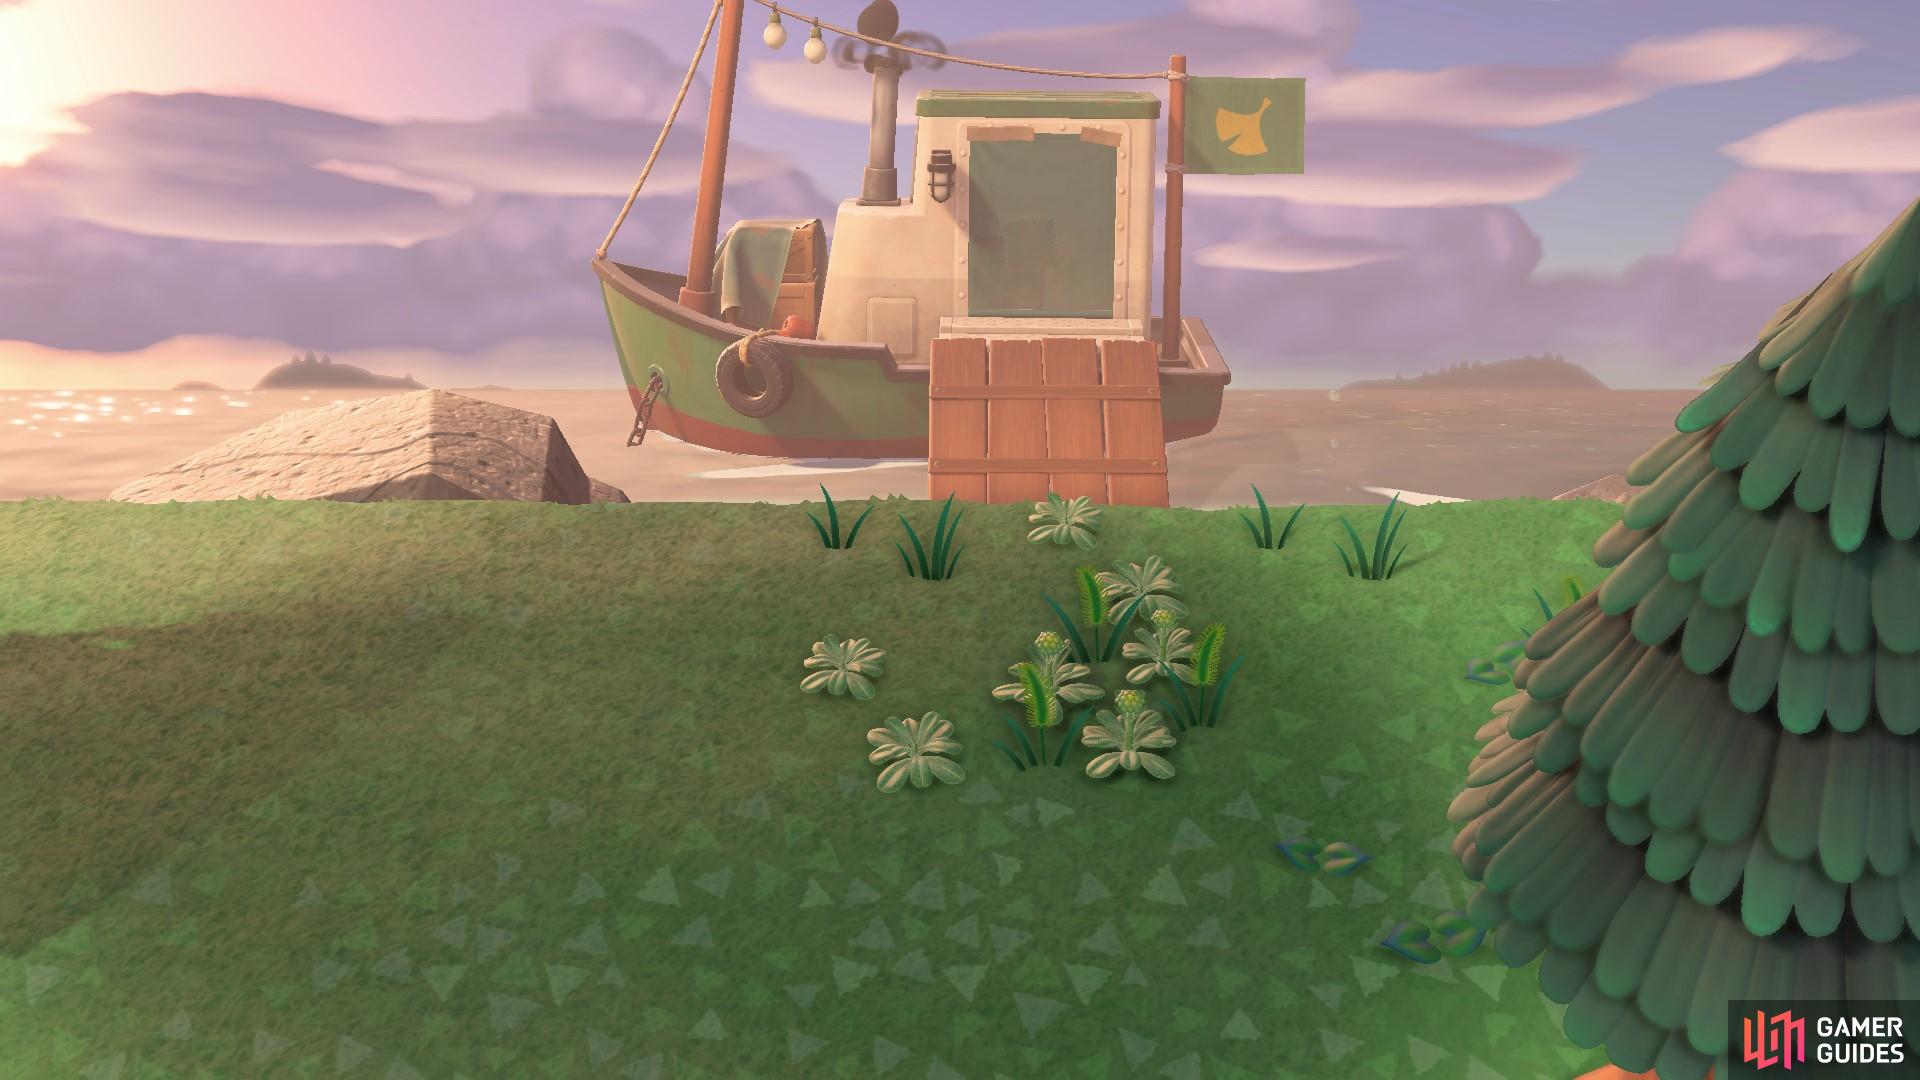 Keep an eye out for Redd's dodgy boat docked up on your island's secret beach.